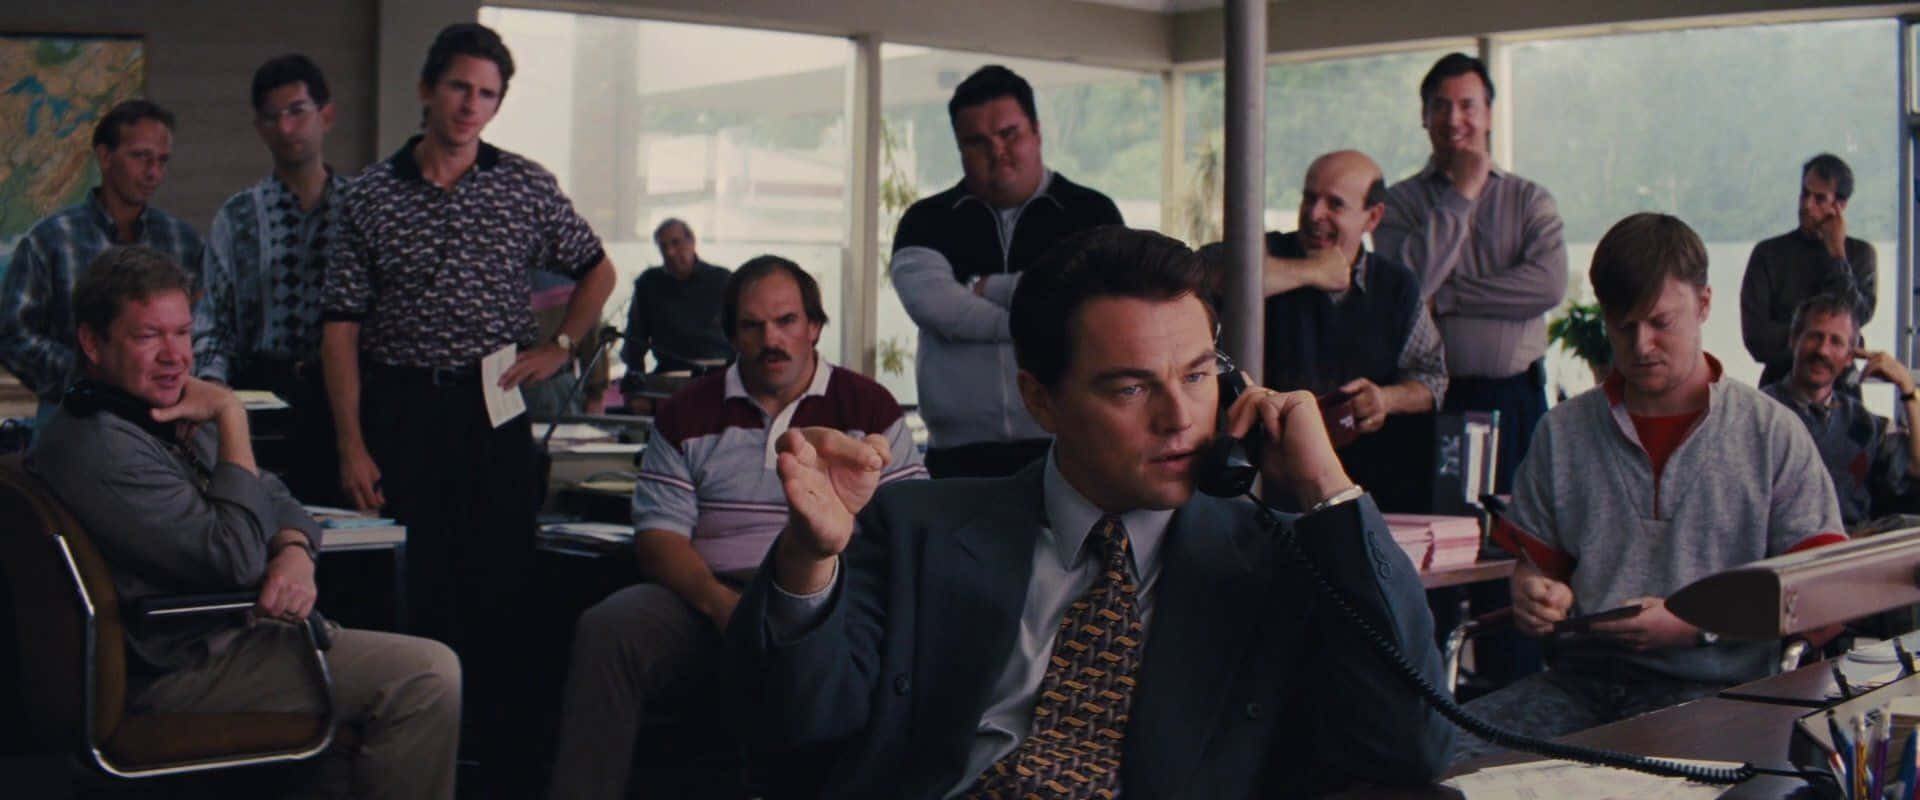 Movie The Wolf Of Wall Street Leonardo Dicaprio Jordan Belfort HD Wallpaper  Background Paper Print  Movies posters in India  Buy art film design  movie music nature and educational paintingswallpapers at